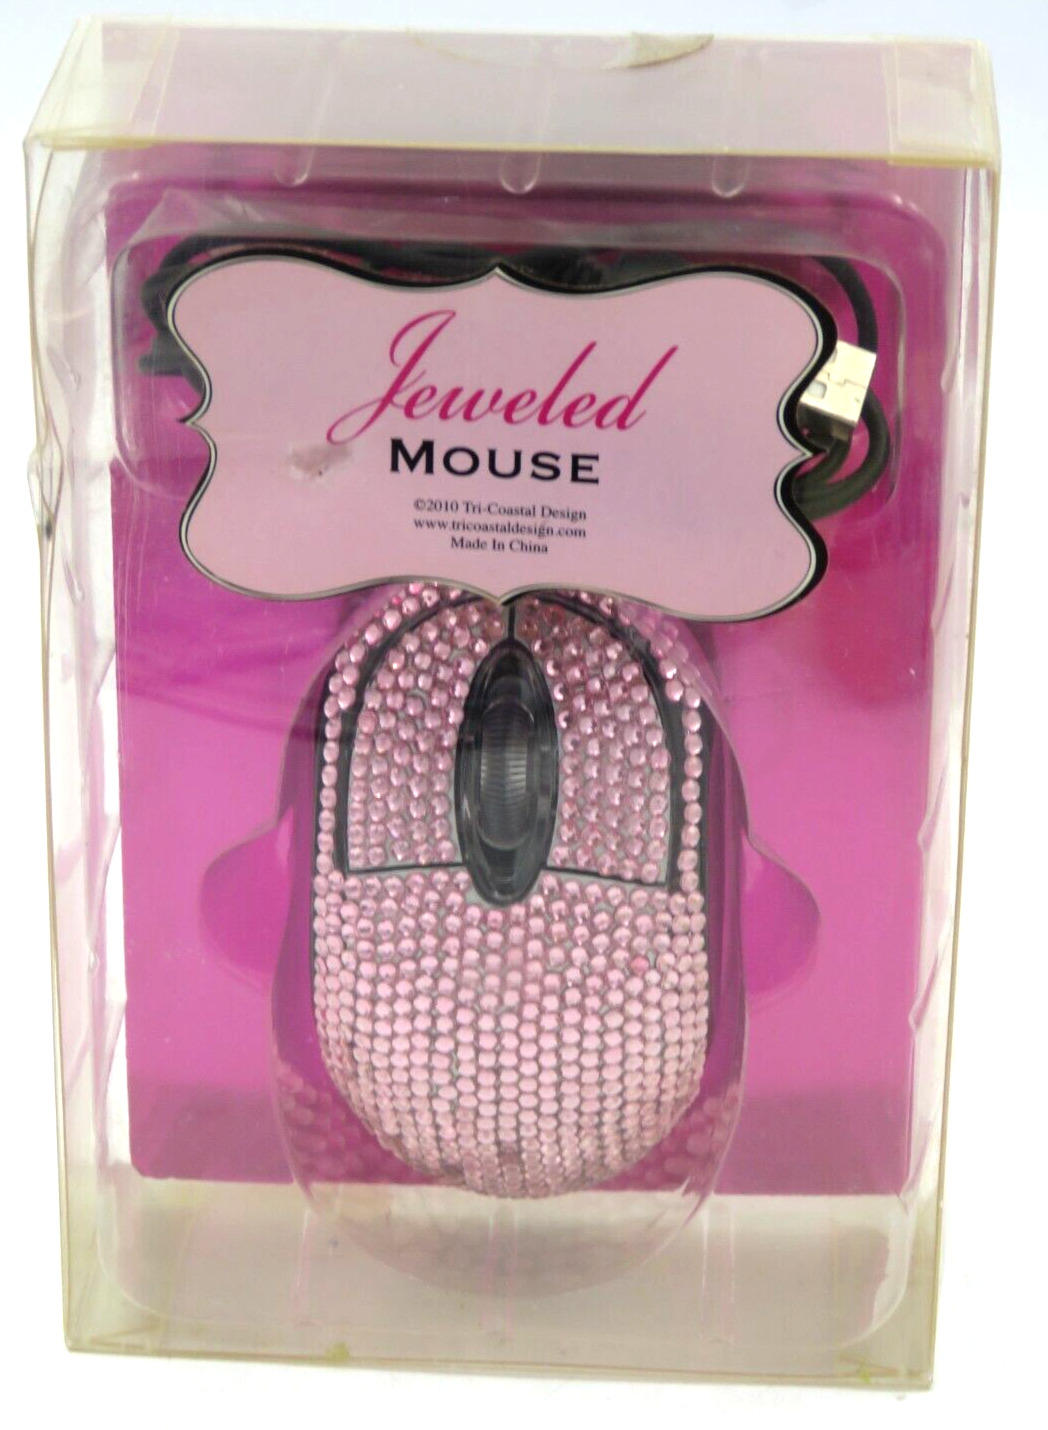 Pink Jeweled Mouse PC Bedazzled Wired Tri-Coastal Design